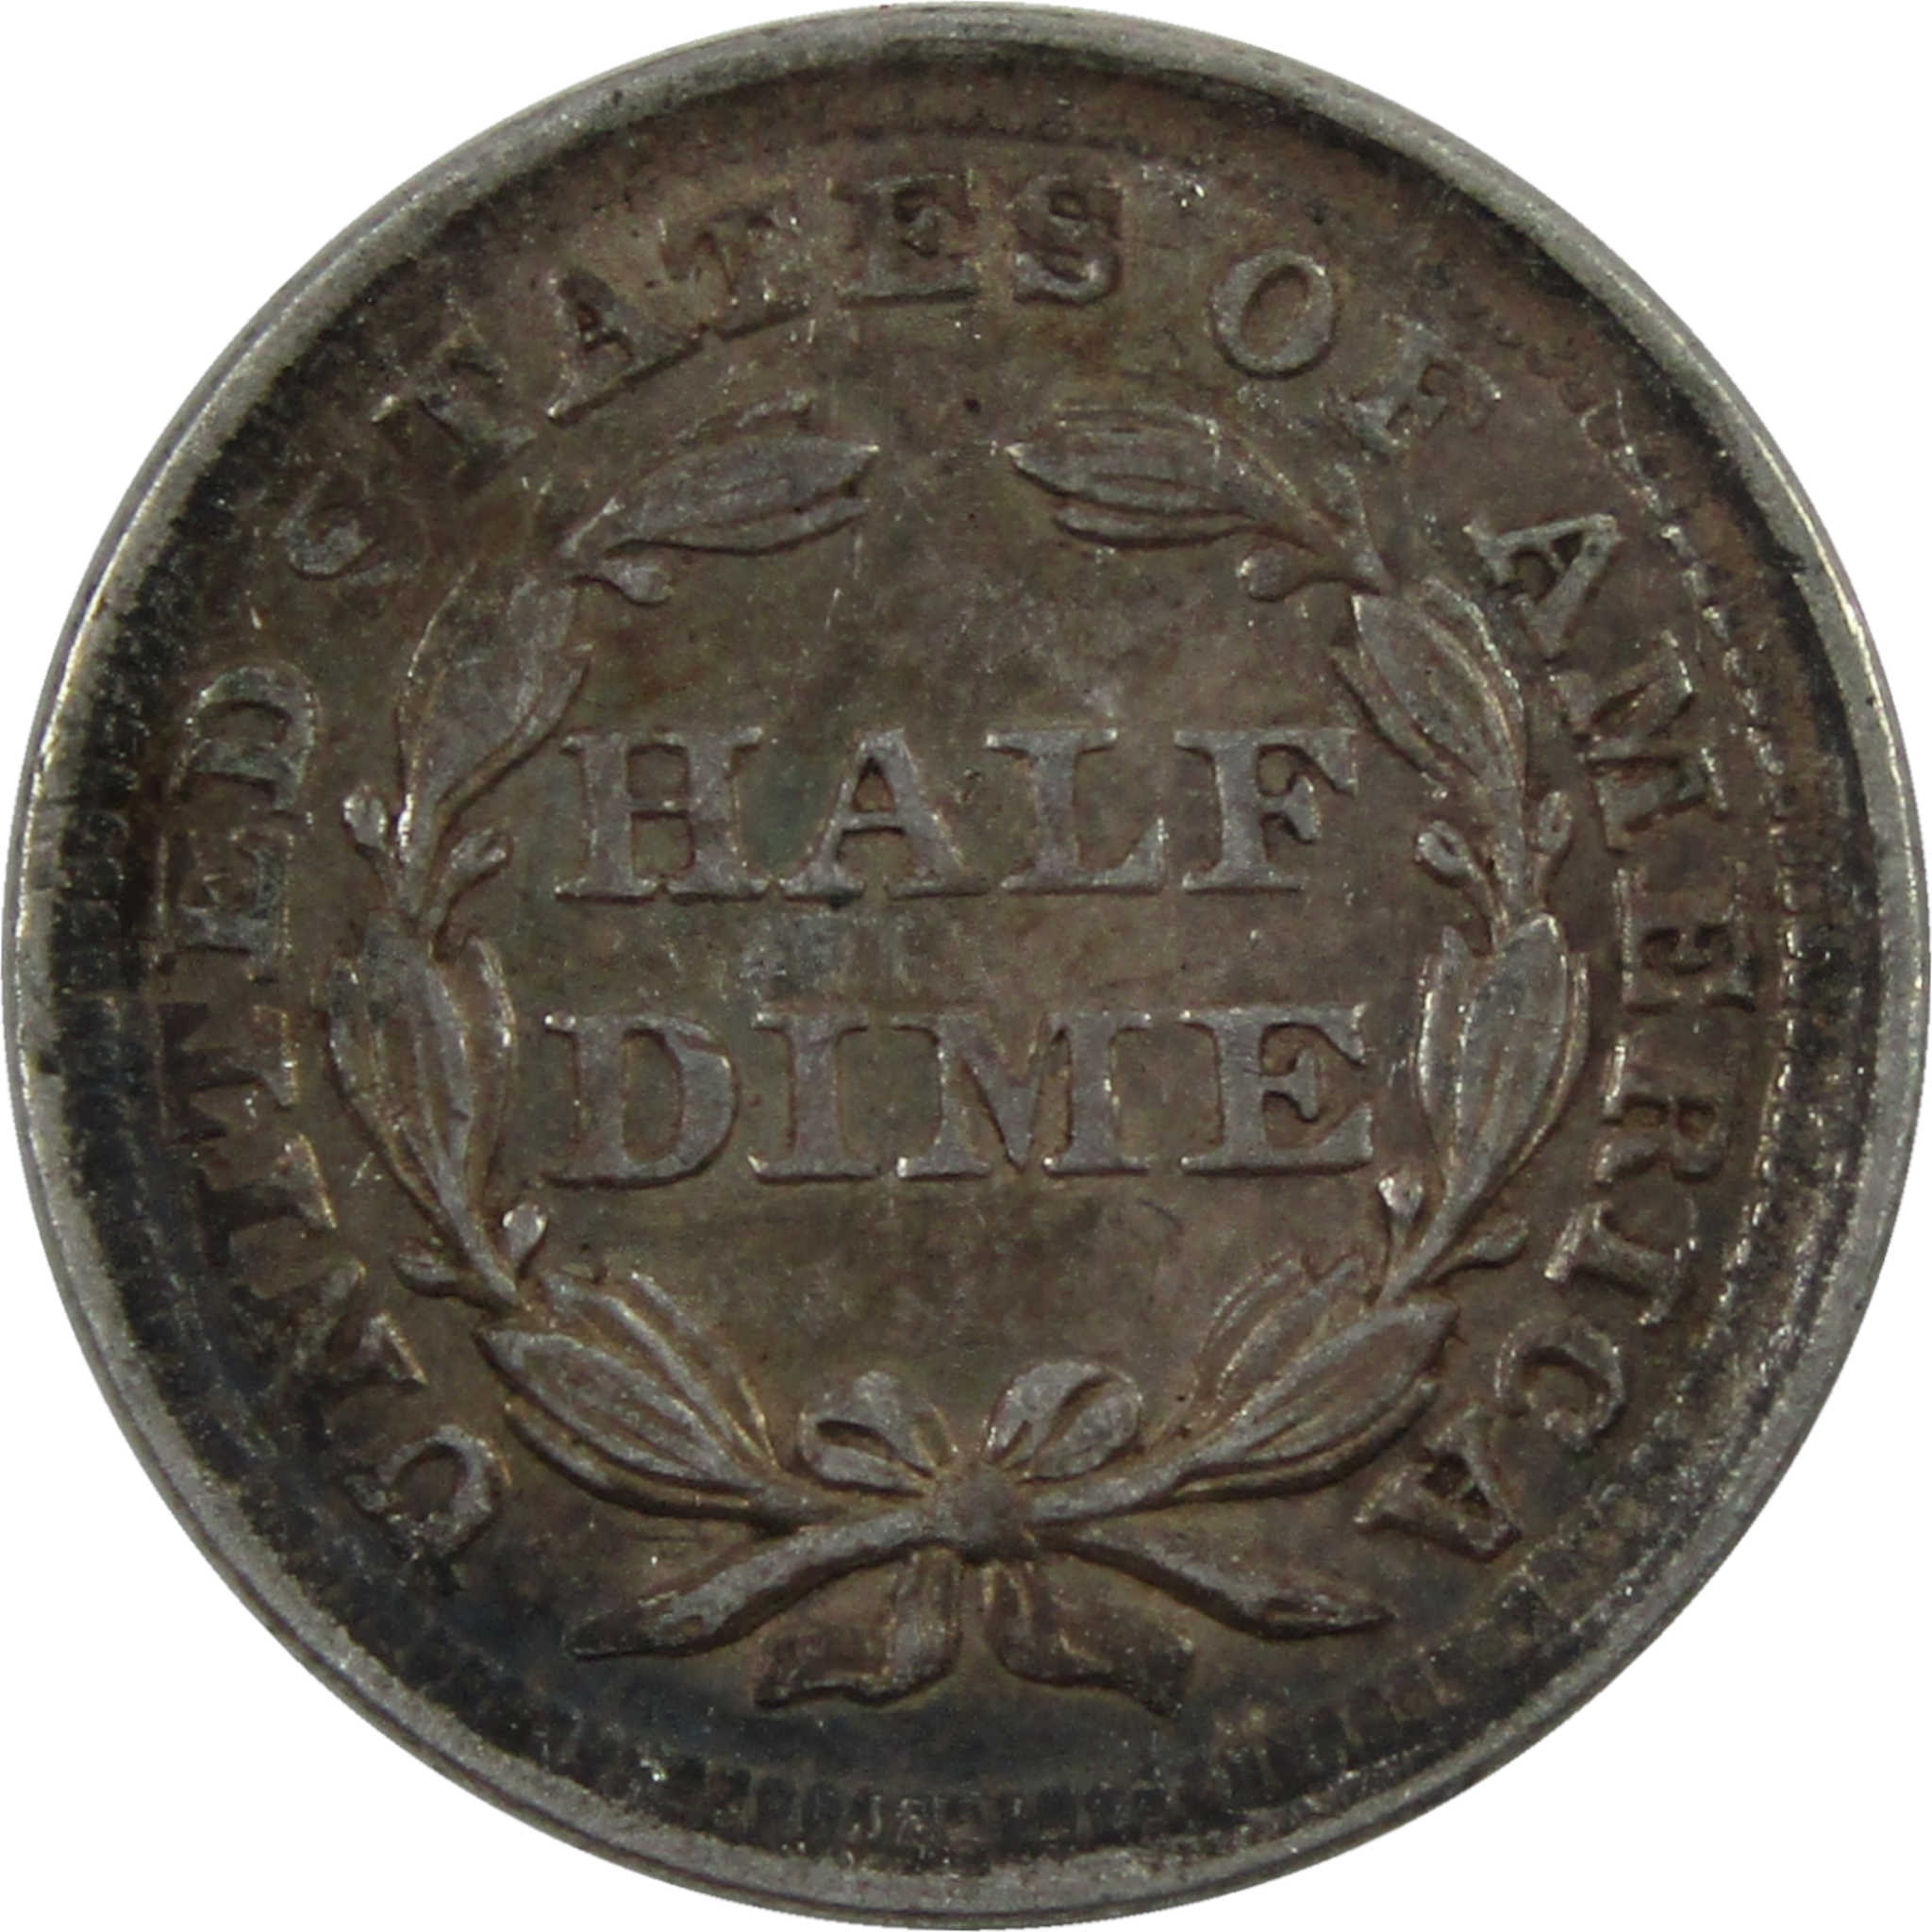 1858 Seated Liberty Half Dime Silver XF EF Extremely Fine SKU:I4527